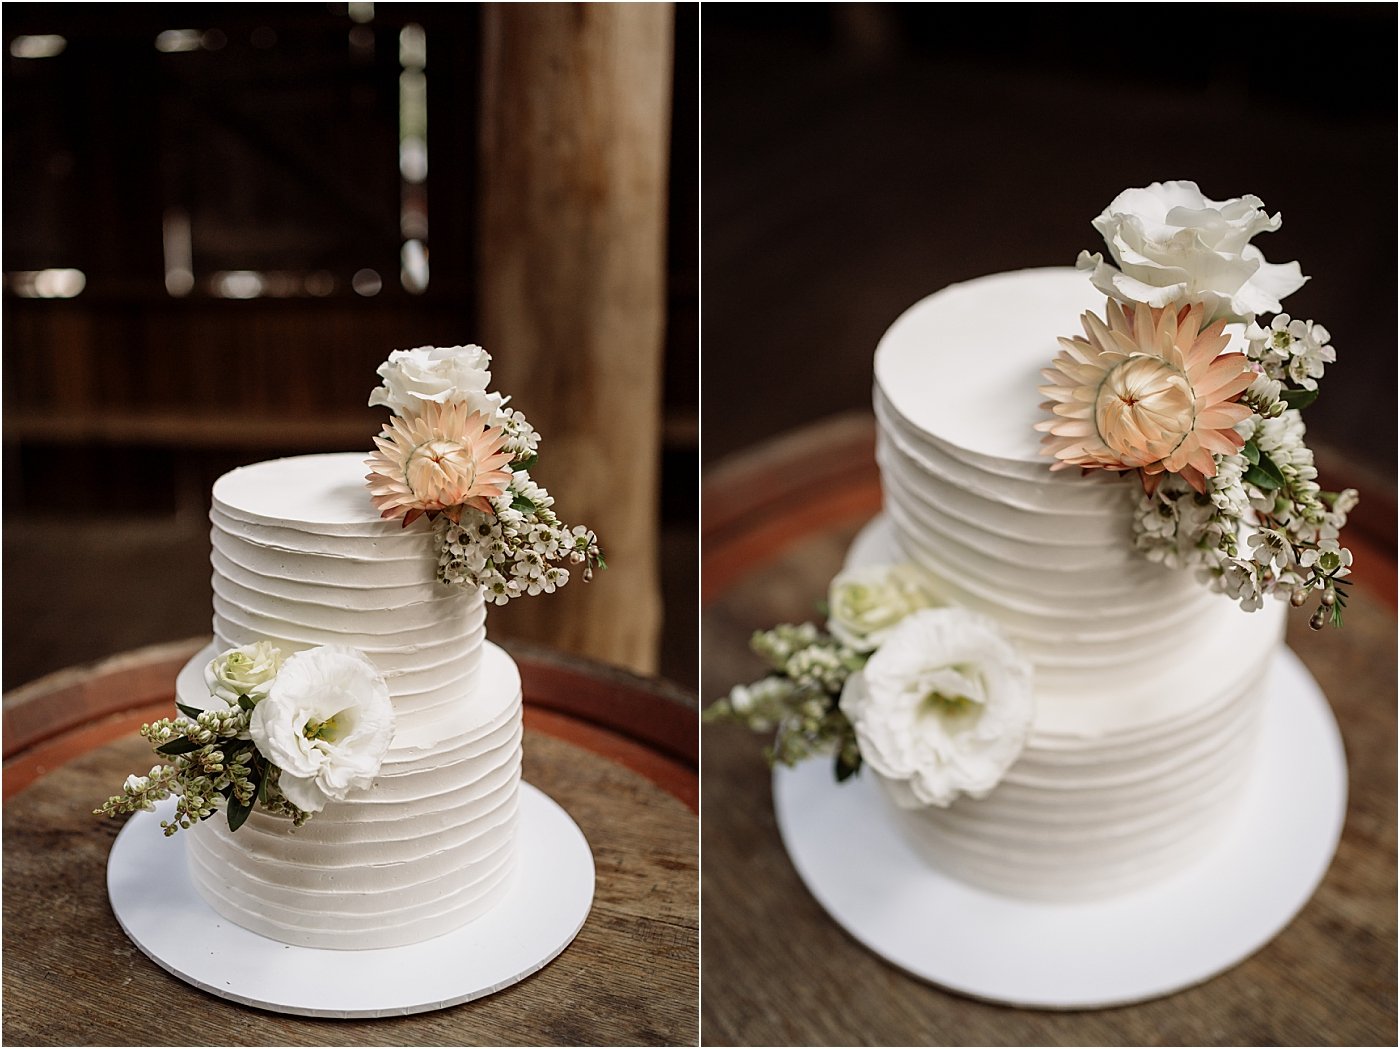 Two-tiered white wedding cake, decorated with pink and white flowers